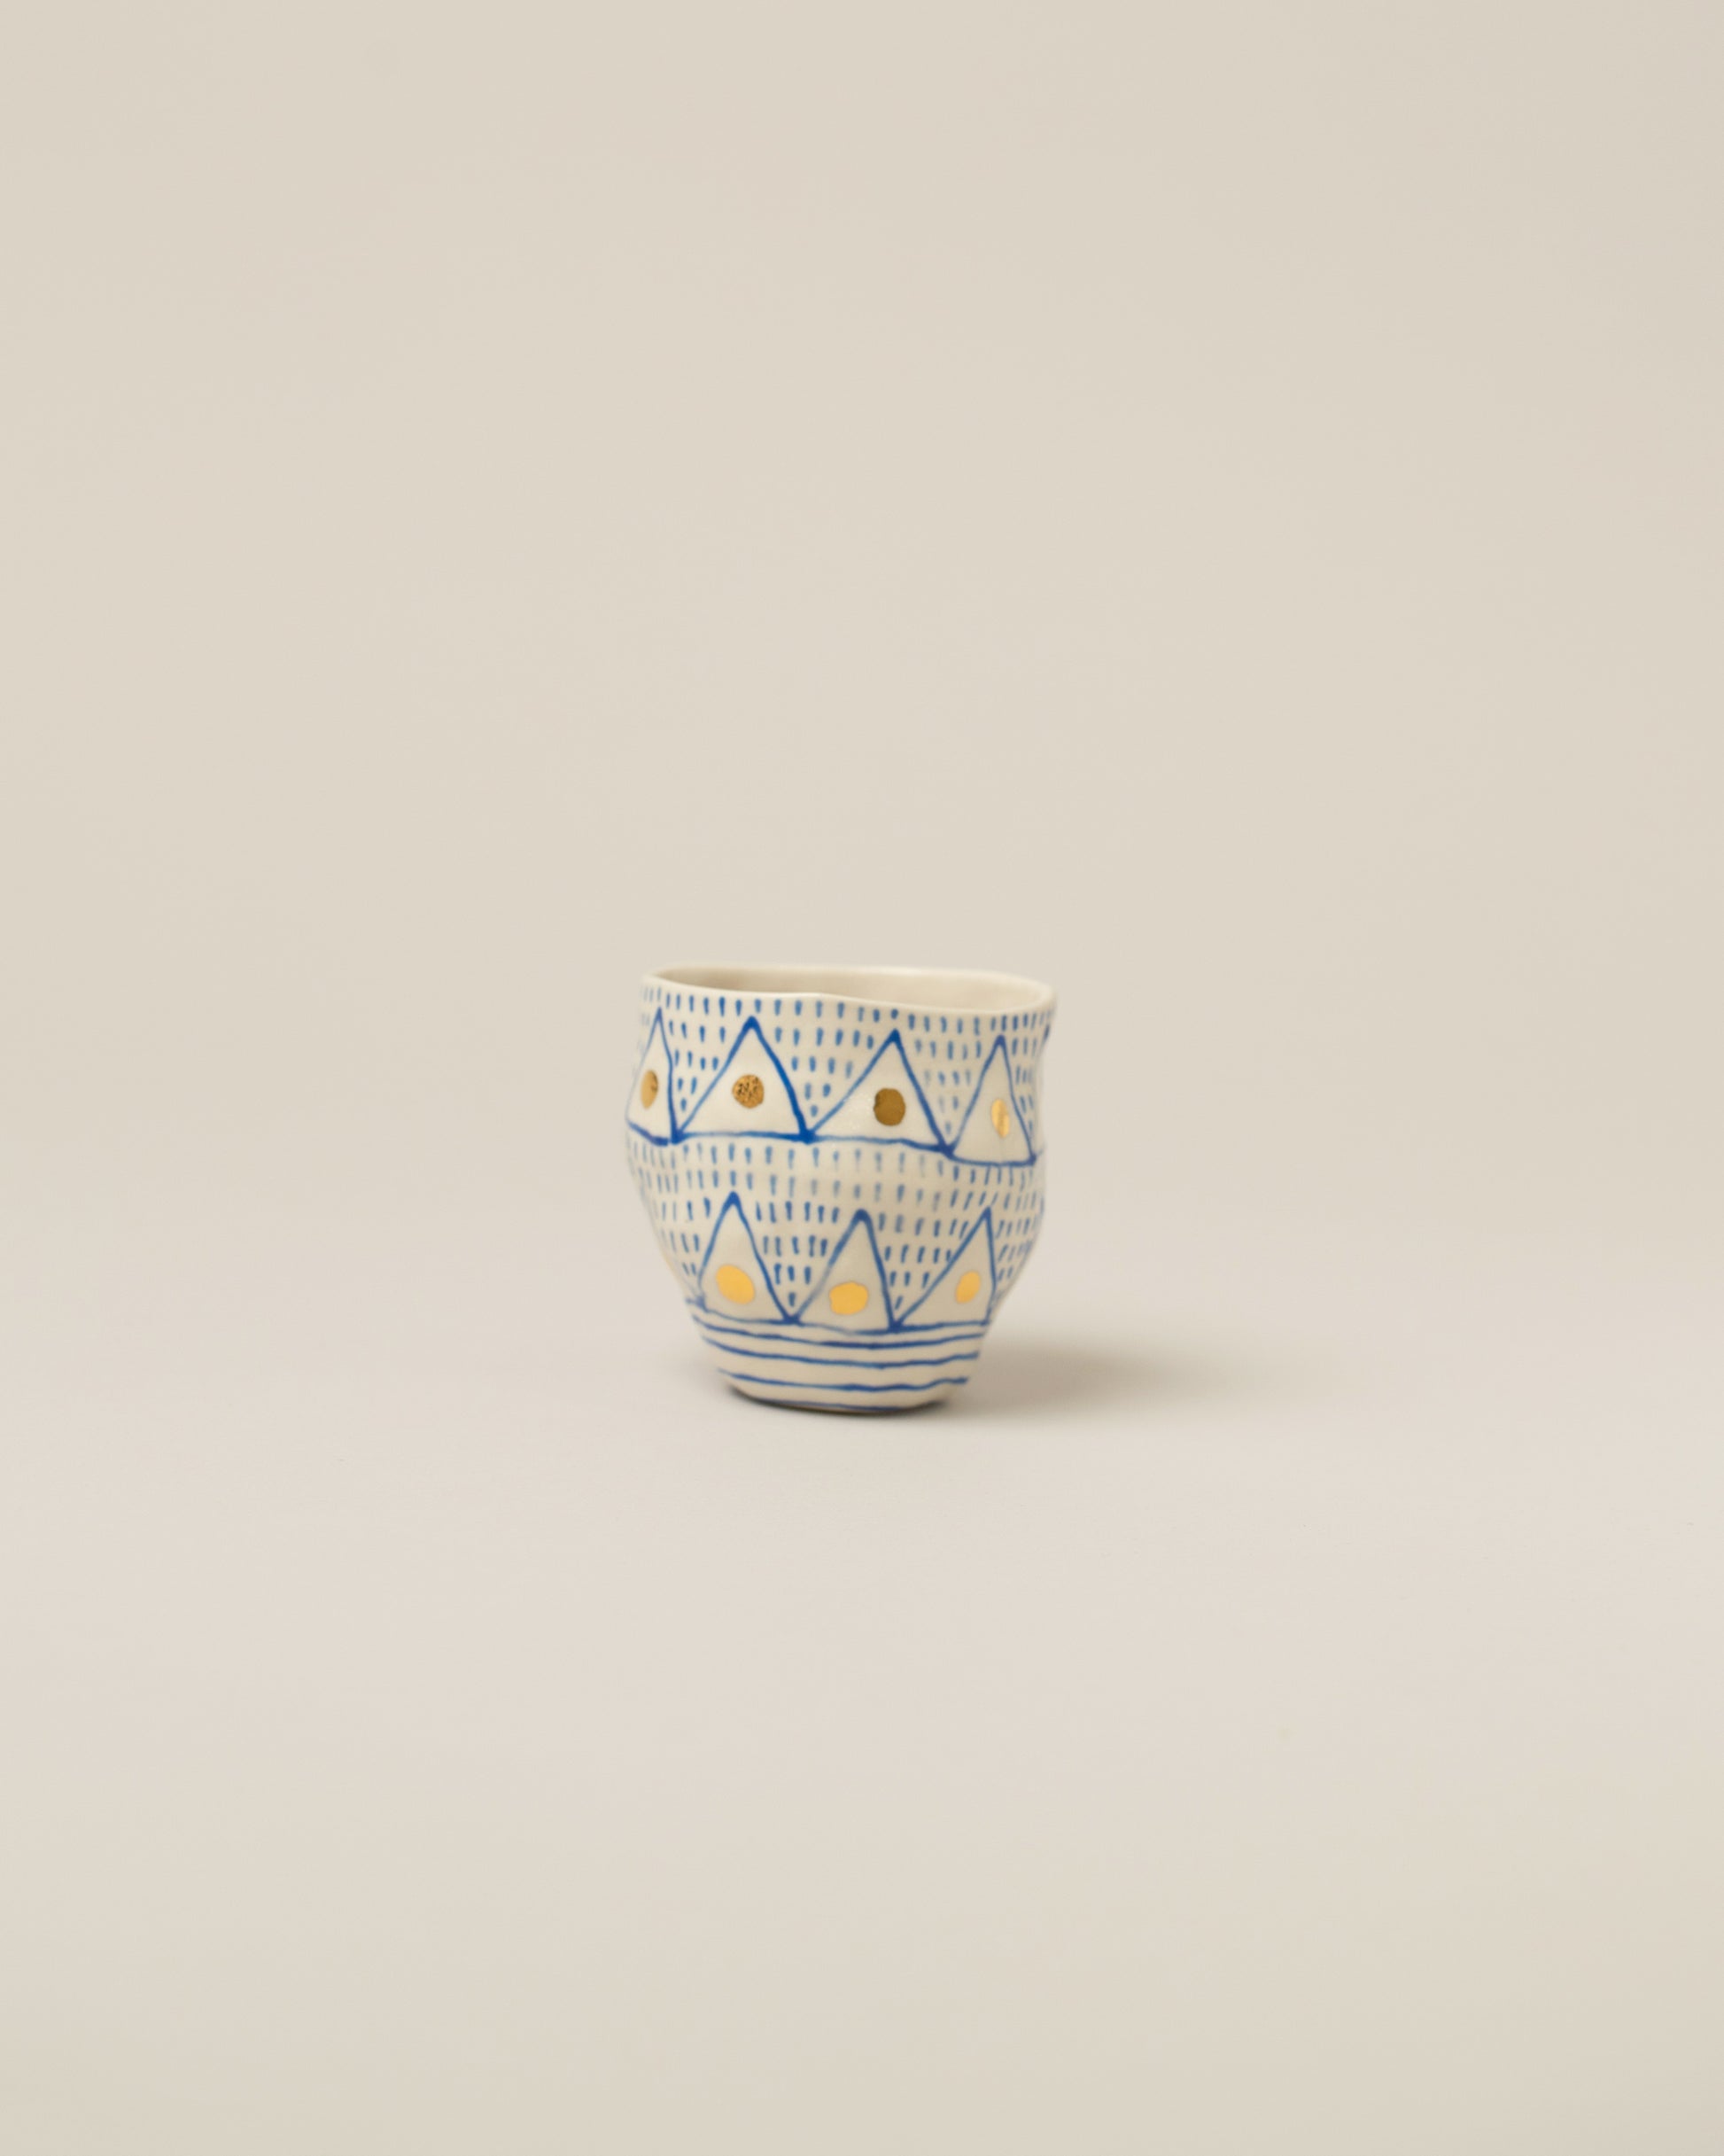 A Suzanne Sullivan Tumbler on light color background, representing the 'Surprise Me' style which will be hand selected by our stylist, rather than representing exactly any single Tumbler.